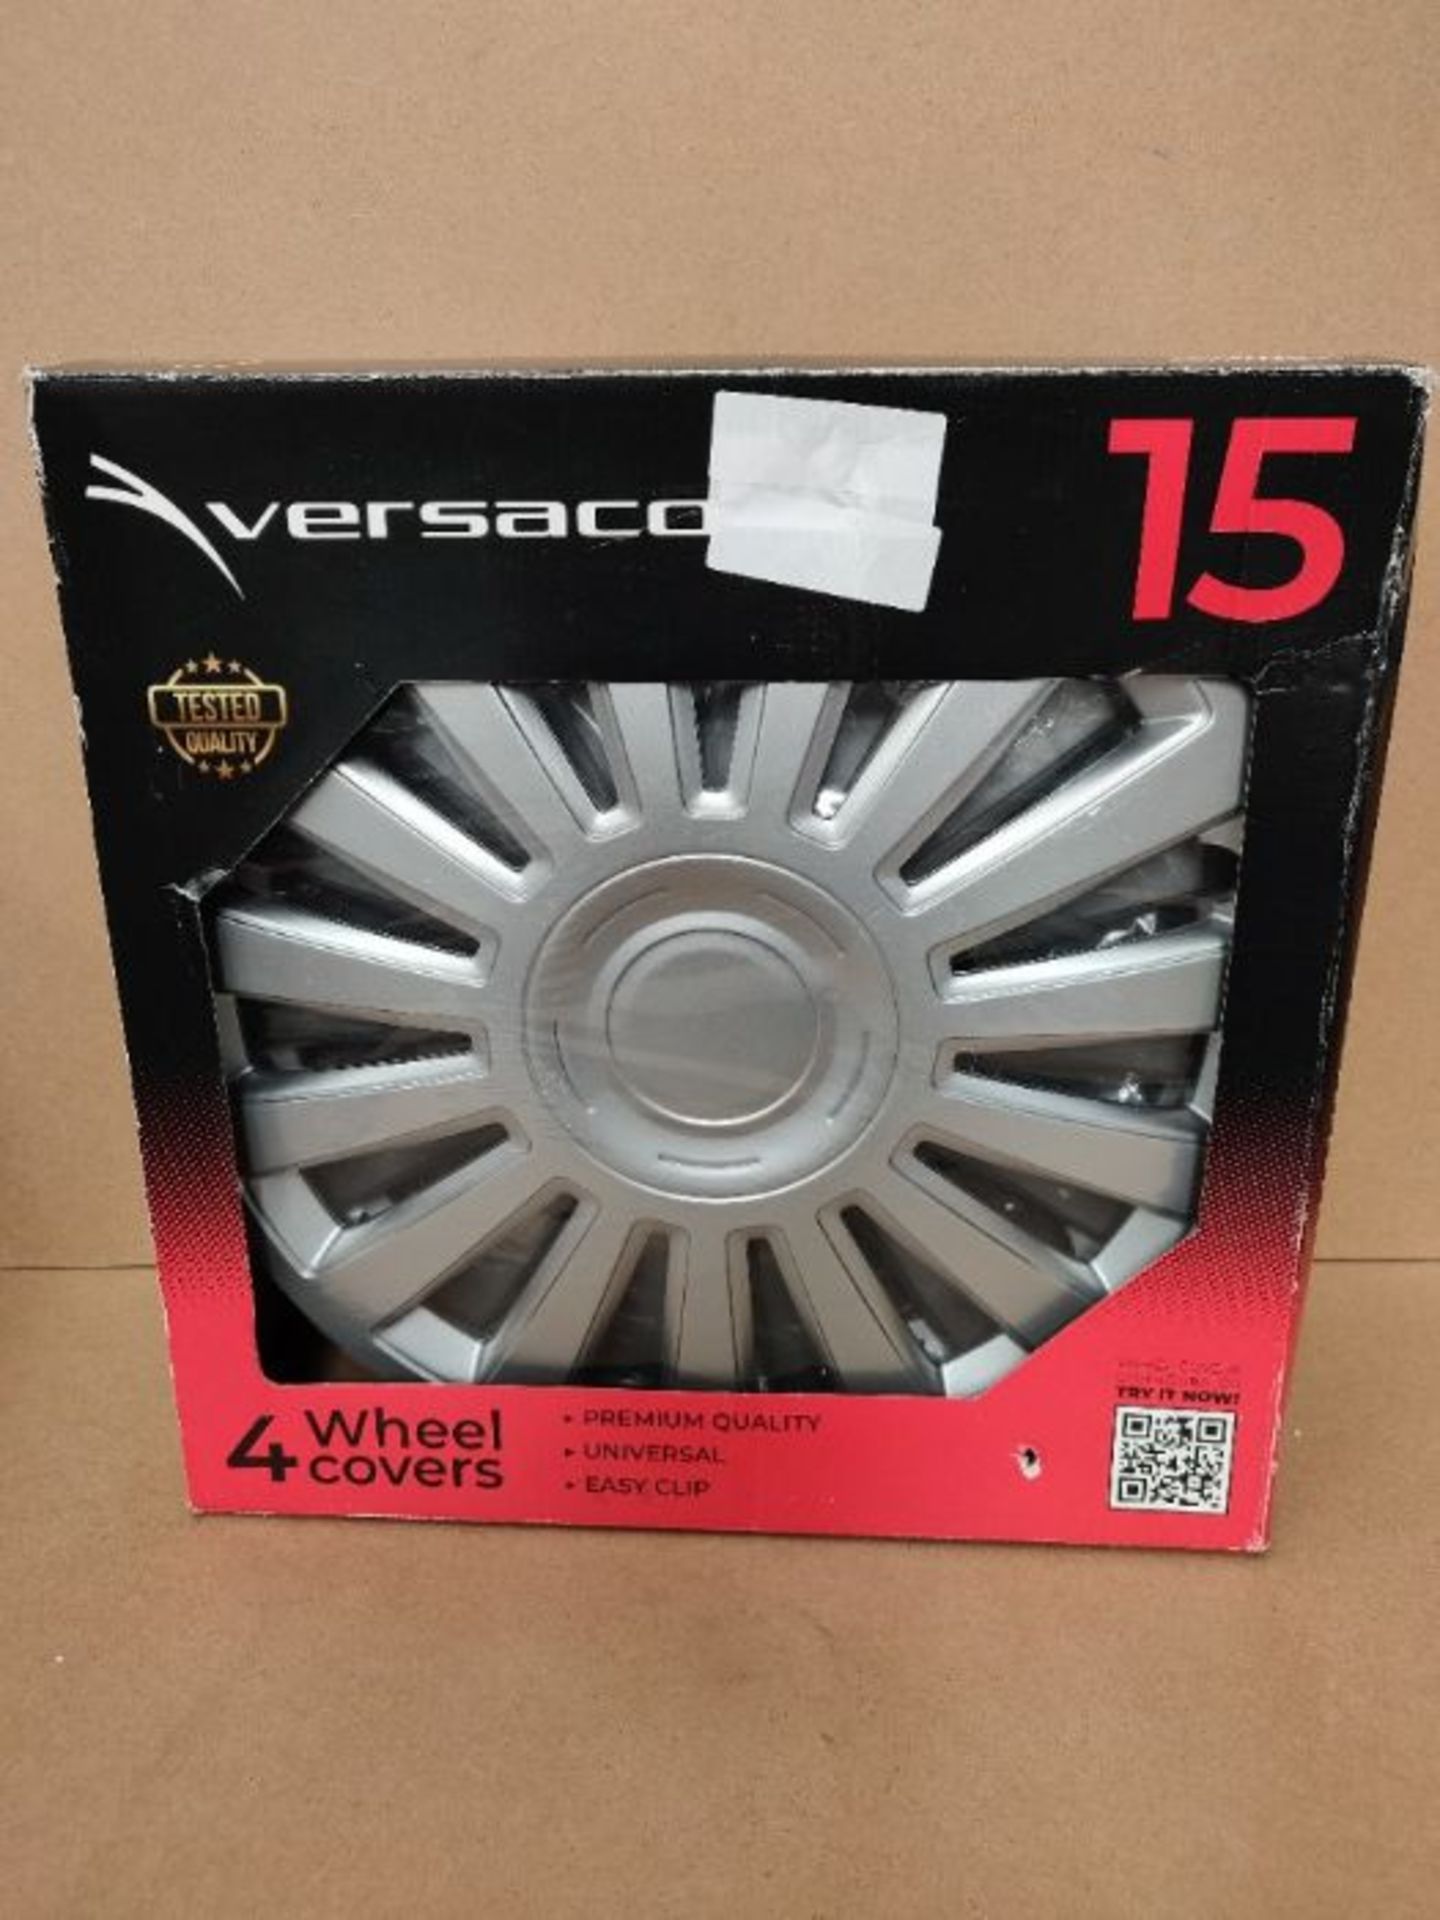 Versaco Car Wheel Trims LUXURY15 - Silver 15 Inch 15-Spoke - Boxed Set of 4 Hubcaps - - Image 2 of 3